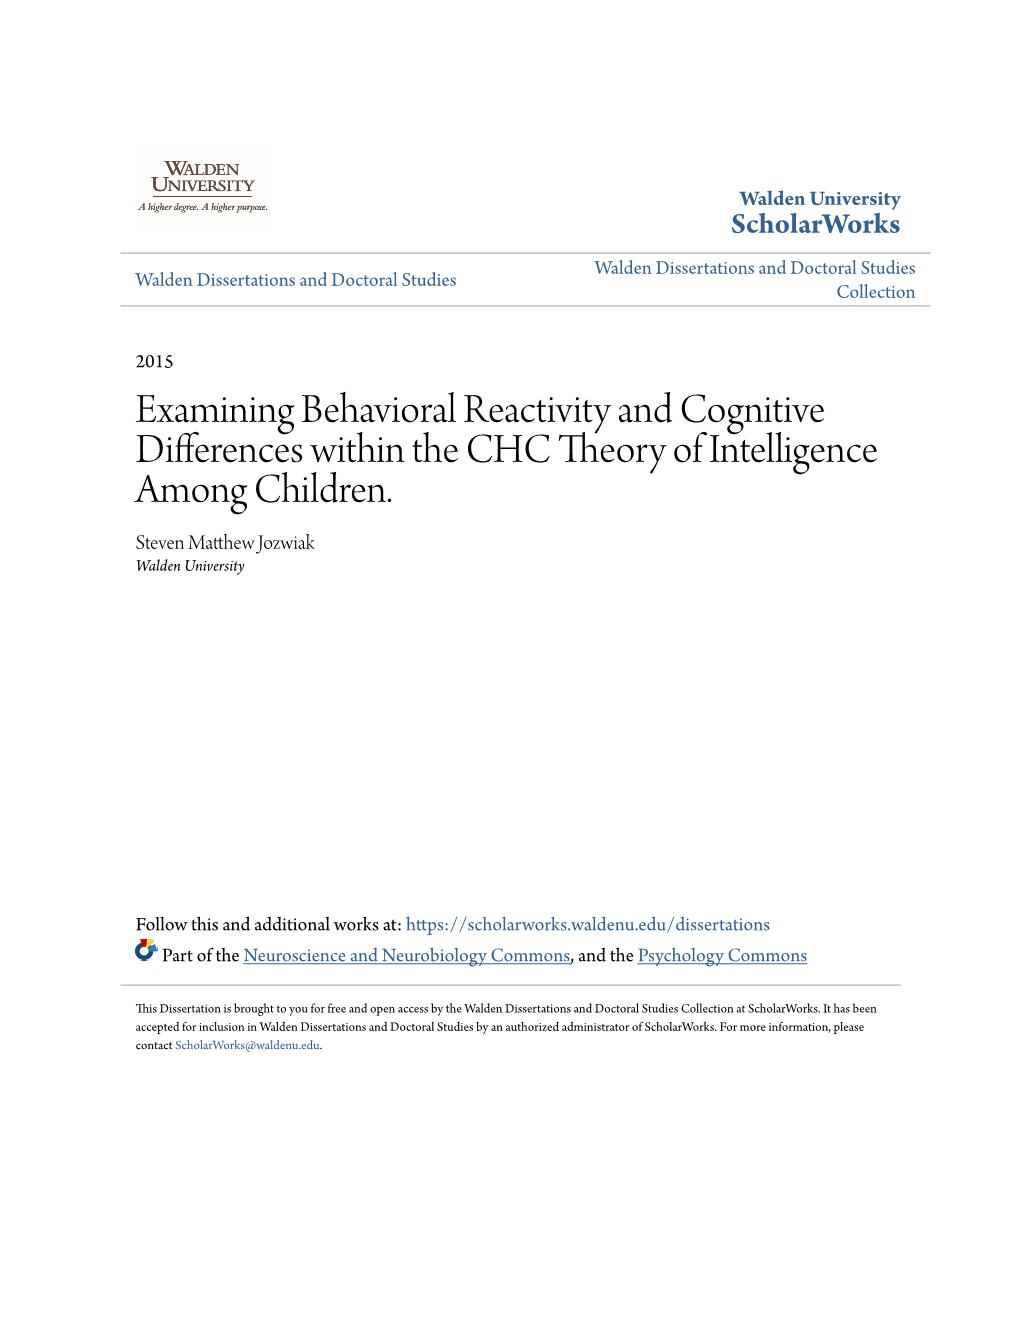 Examining Behavioral Reactivity and Cognitive Differences Within the CHC Theory of Intelligence Among Children